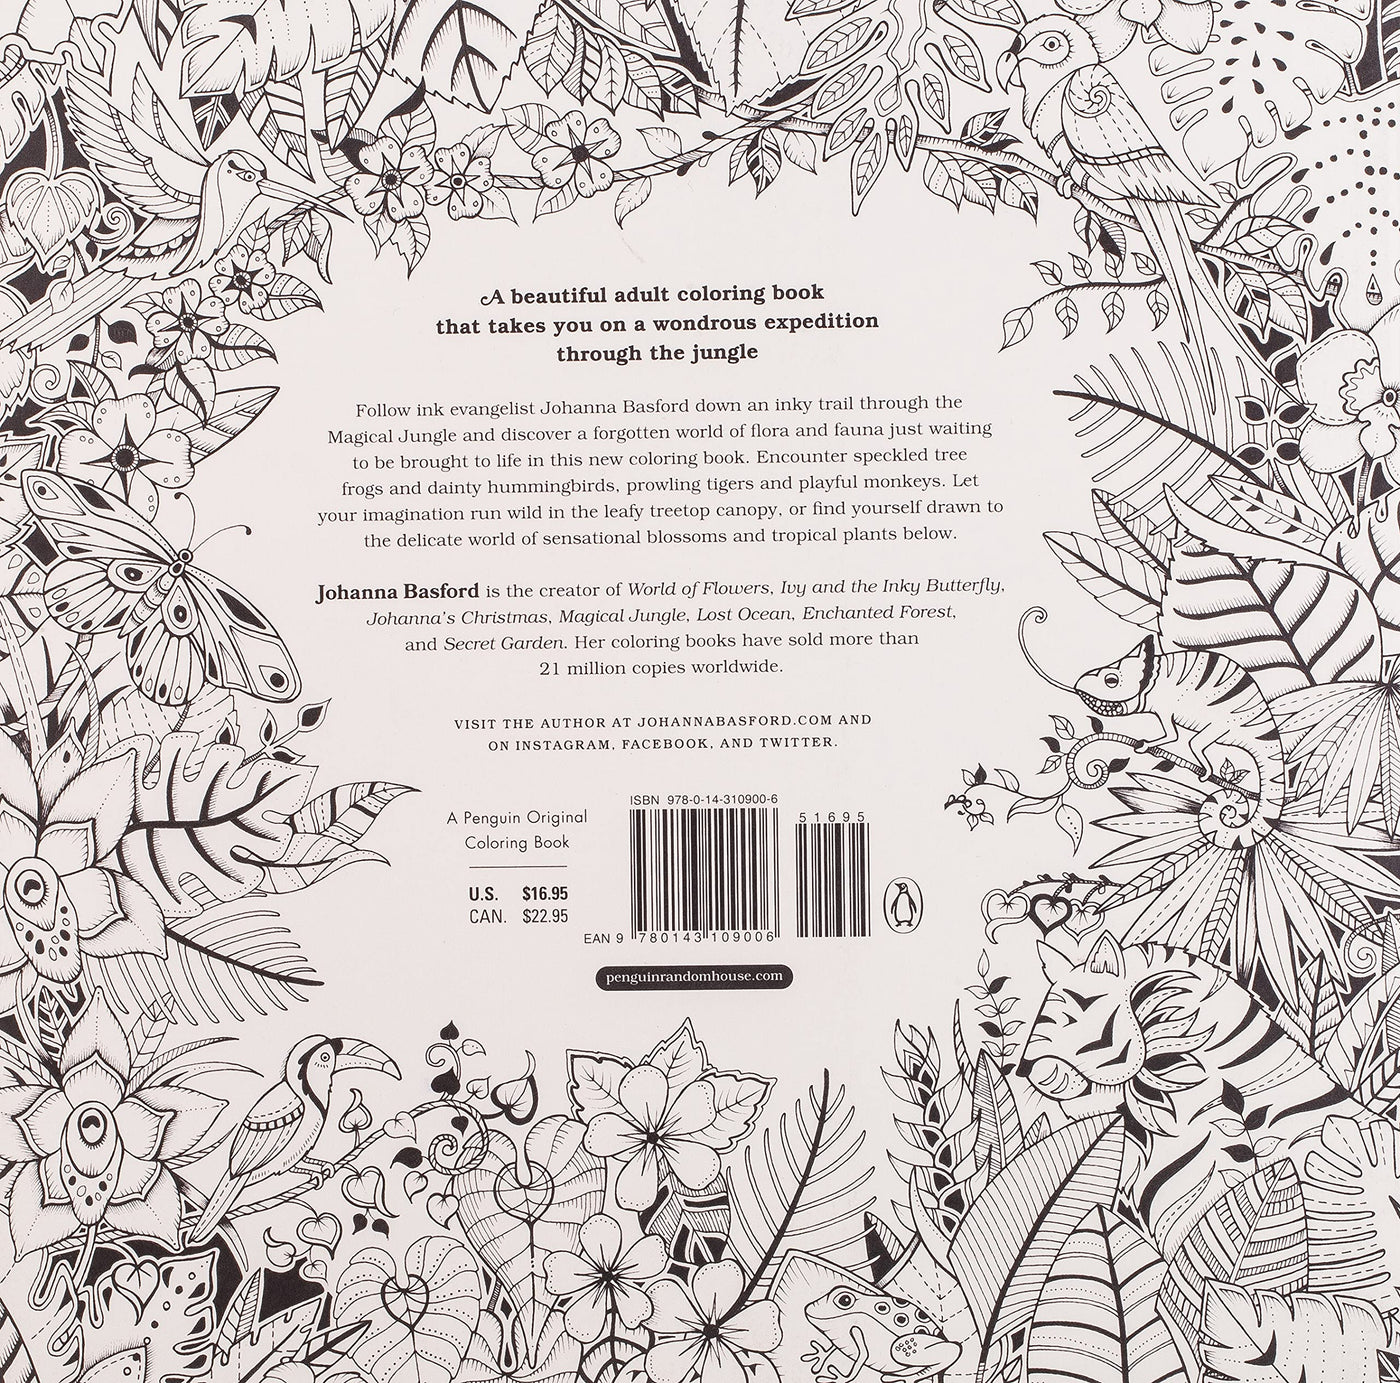 Magical Jungle: An Inky Expedition and Coloring Book for Adults [Book]